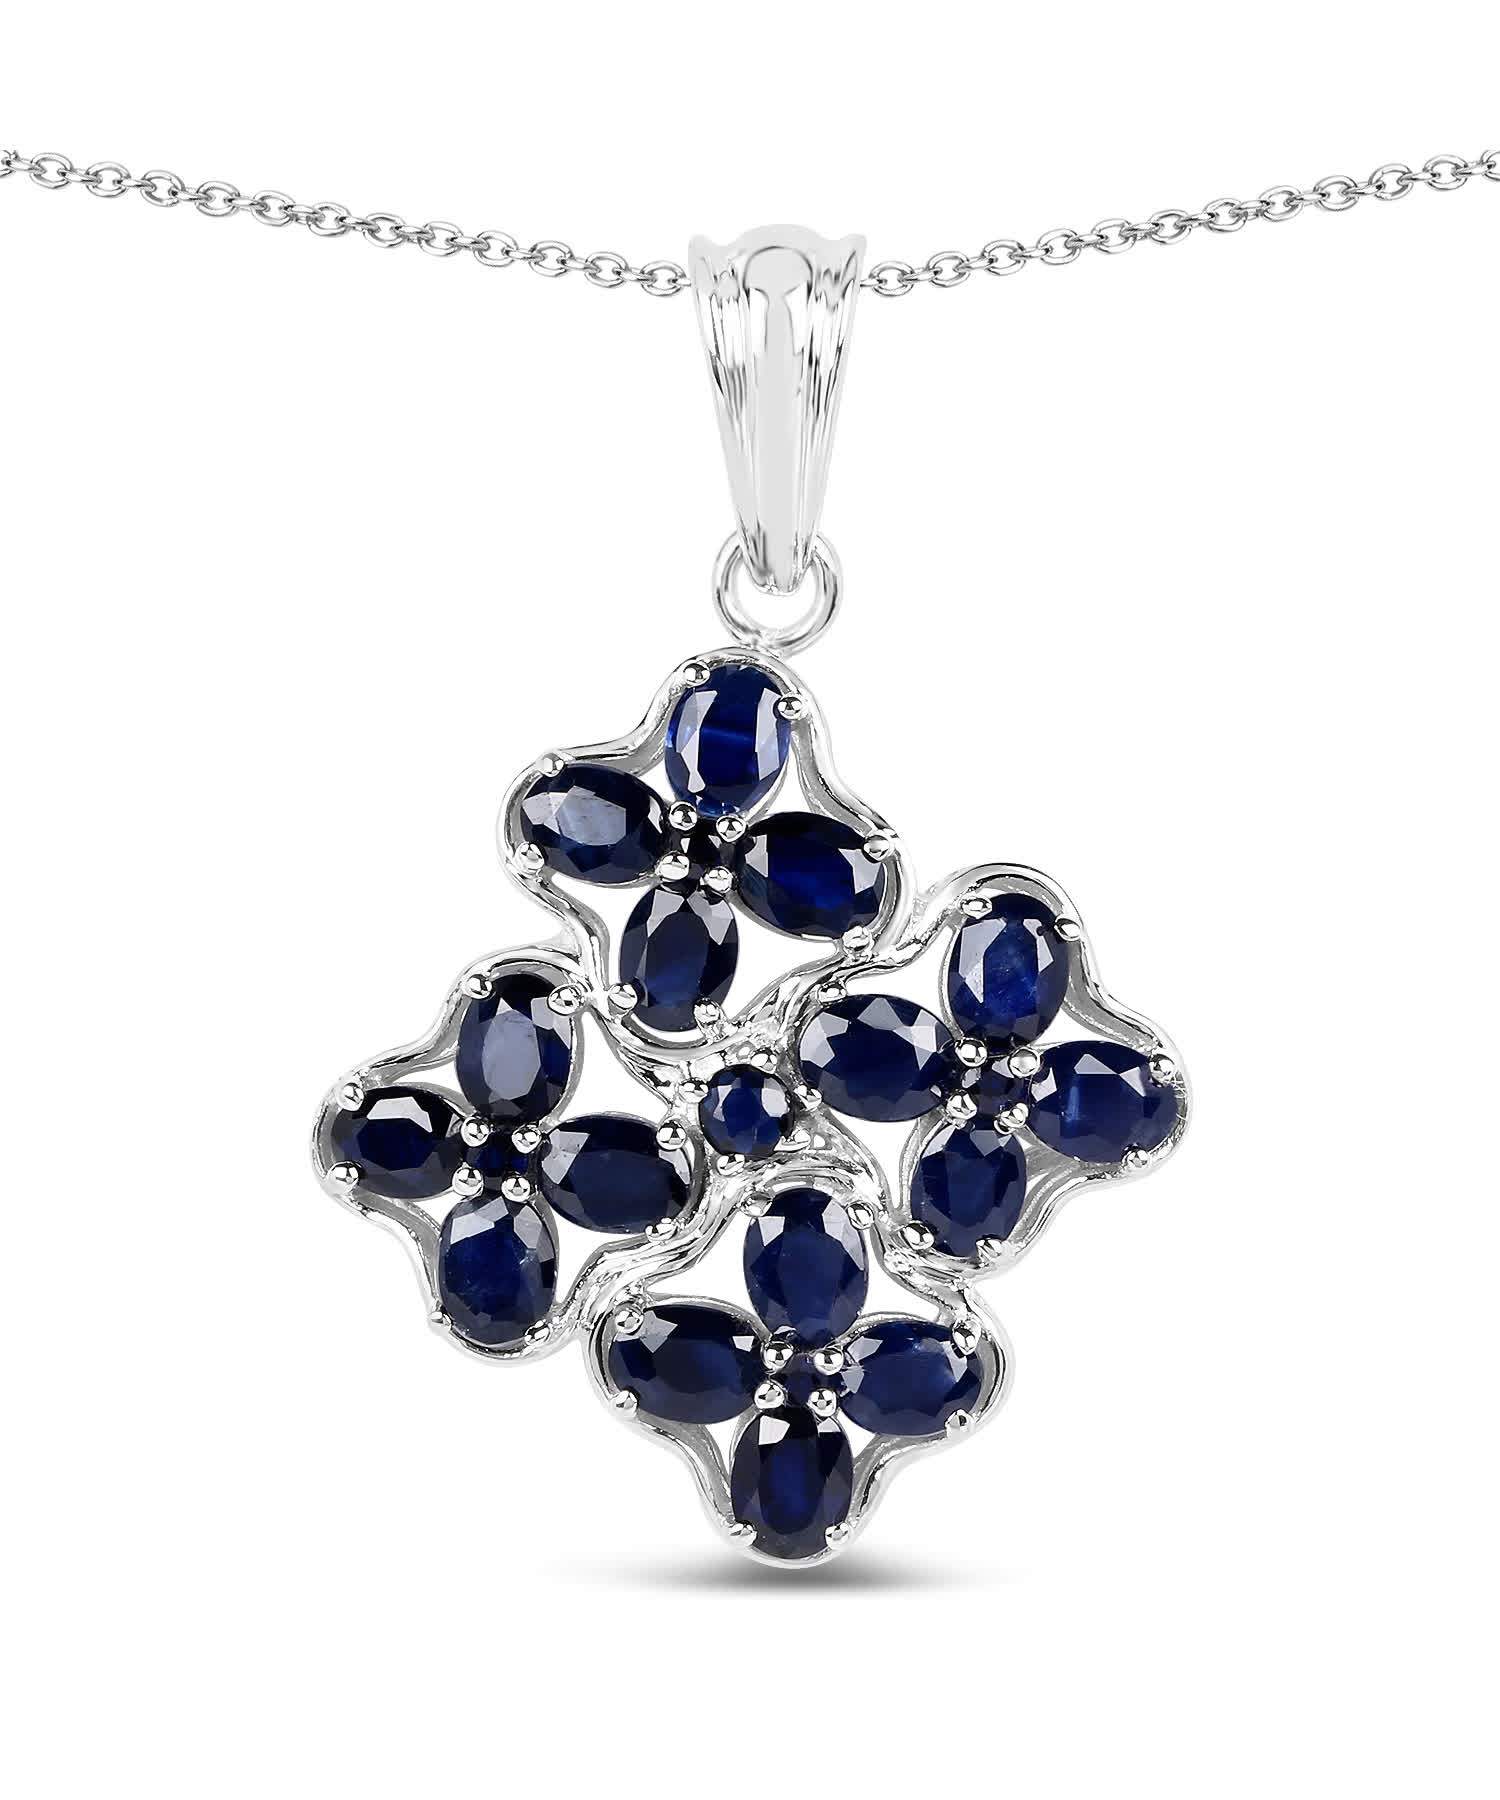 3.68ctw Natural Midnight Blue Sapphire Rhodium Plated 925 Sterling Silver Flower Pendant With Chain View 1